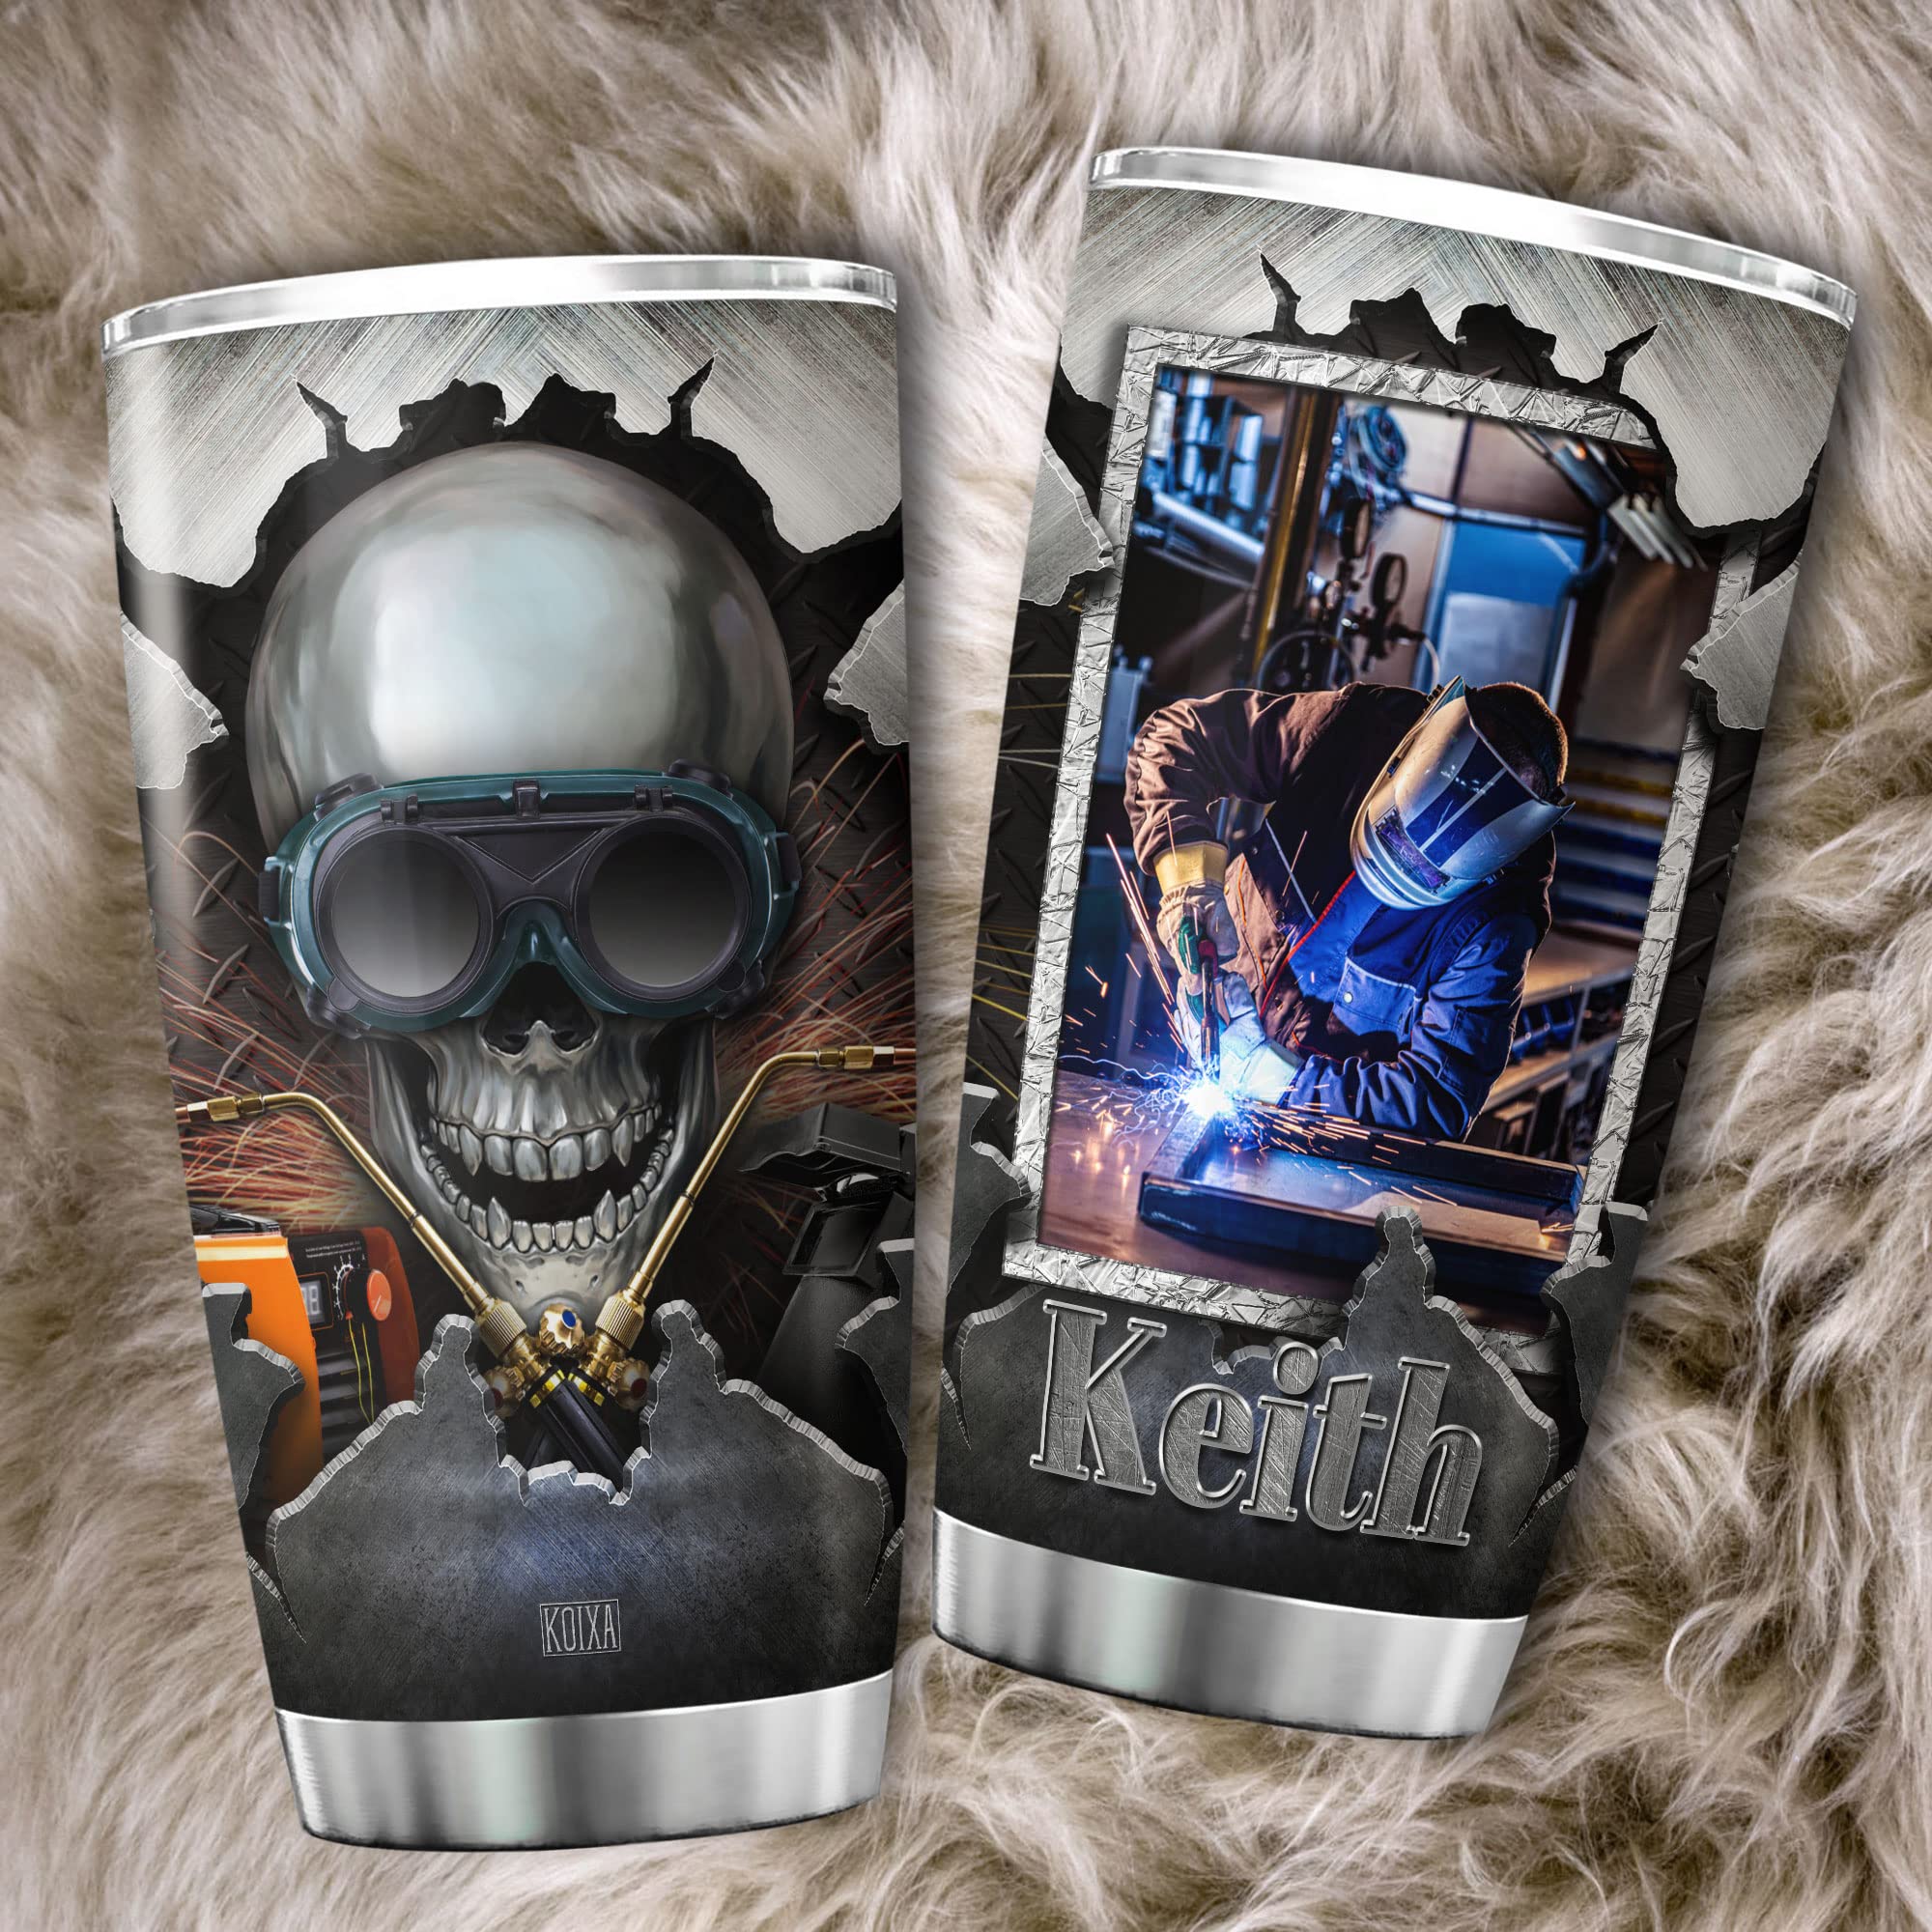 KOIXA Personalized Skull Tumbler Welder Gifts For Men Unique Stainless Steel Coffee Travel Mug 20oz Skull Themed Things For Welders Insulated Cup With Photo And Name Welding Gift